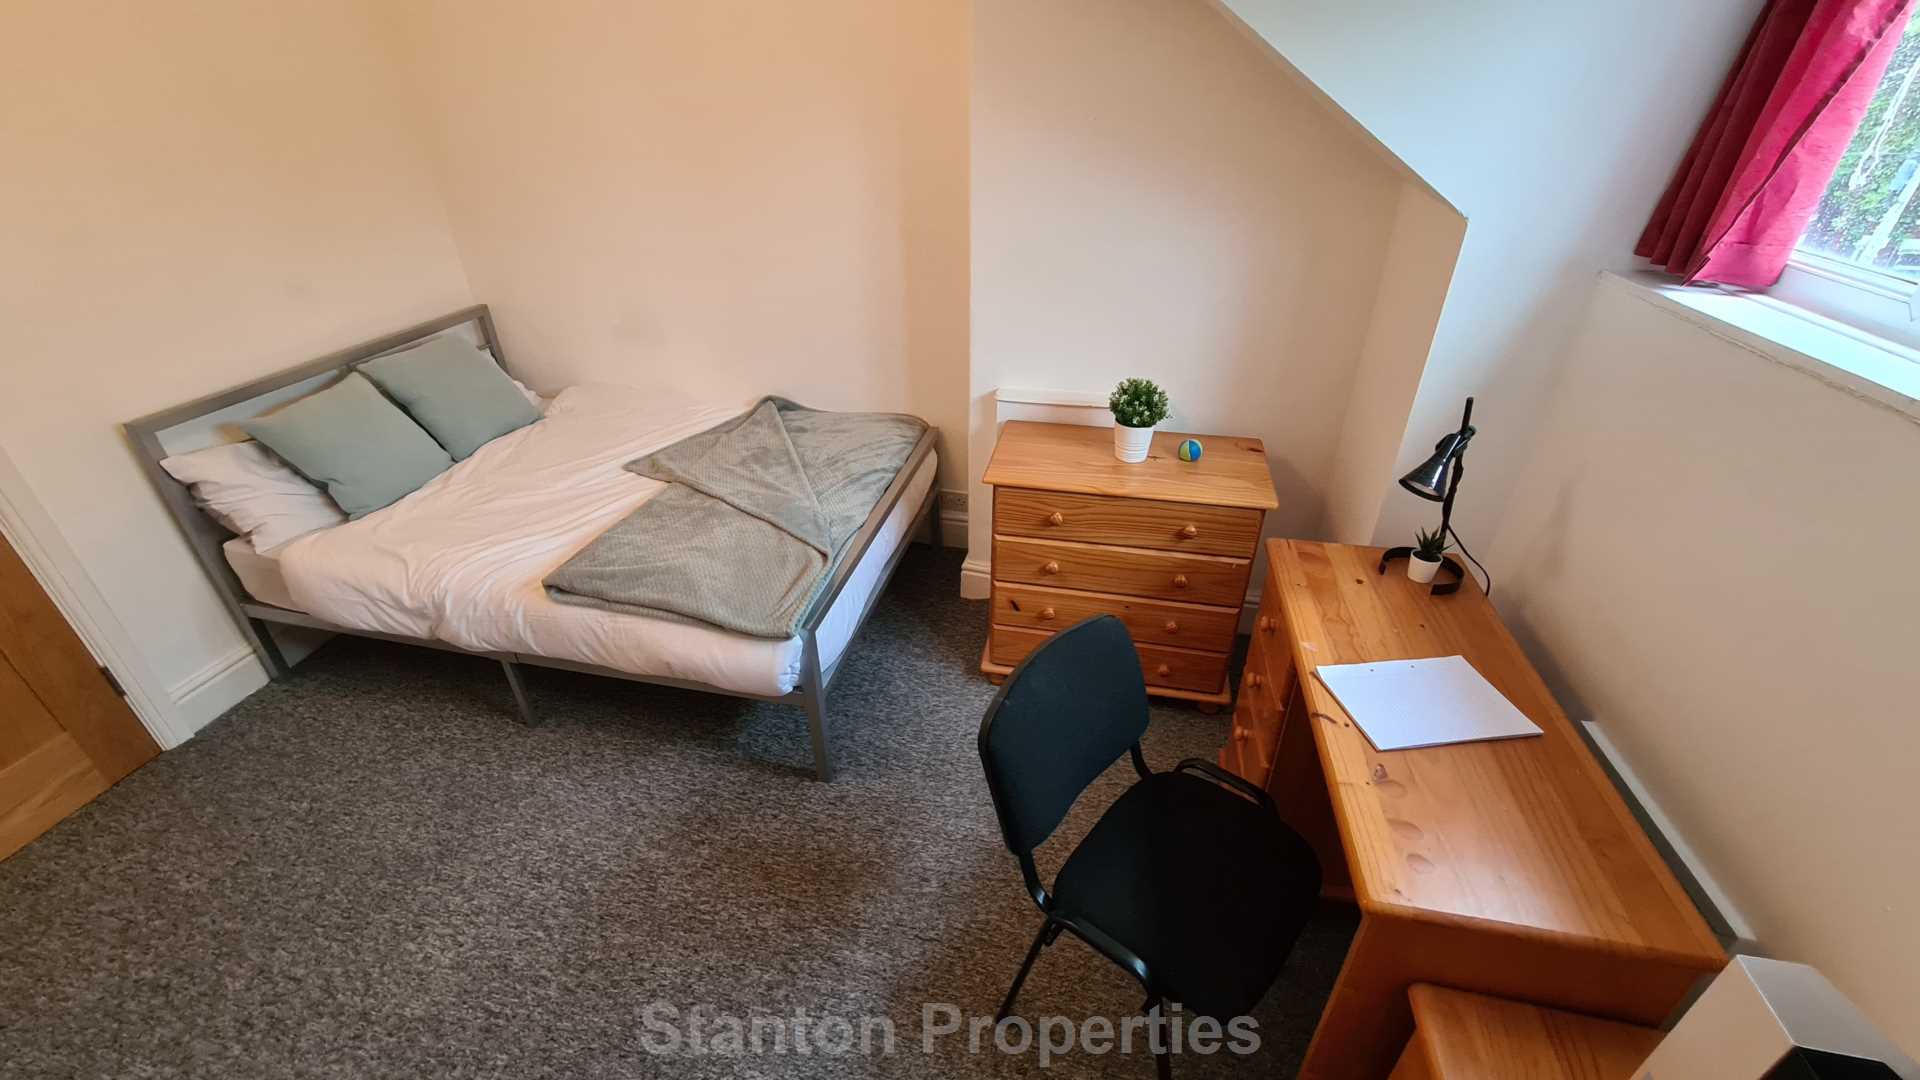 £145 pppw, See Video Tour, Wellington Road, Fallowfield, Image 31